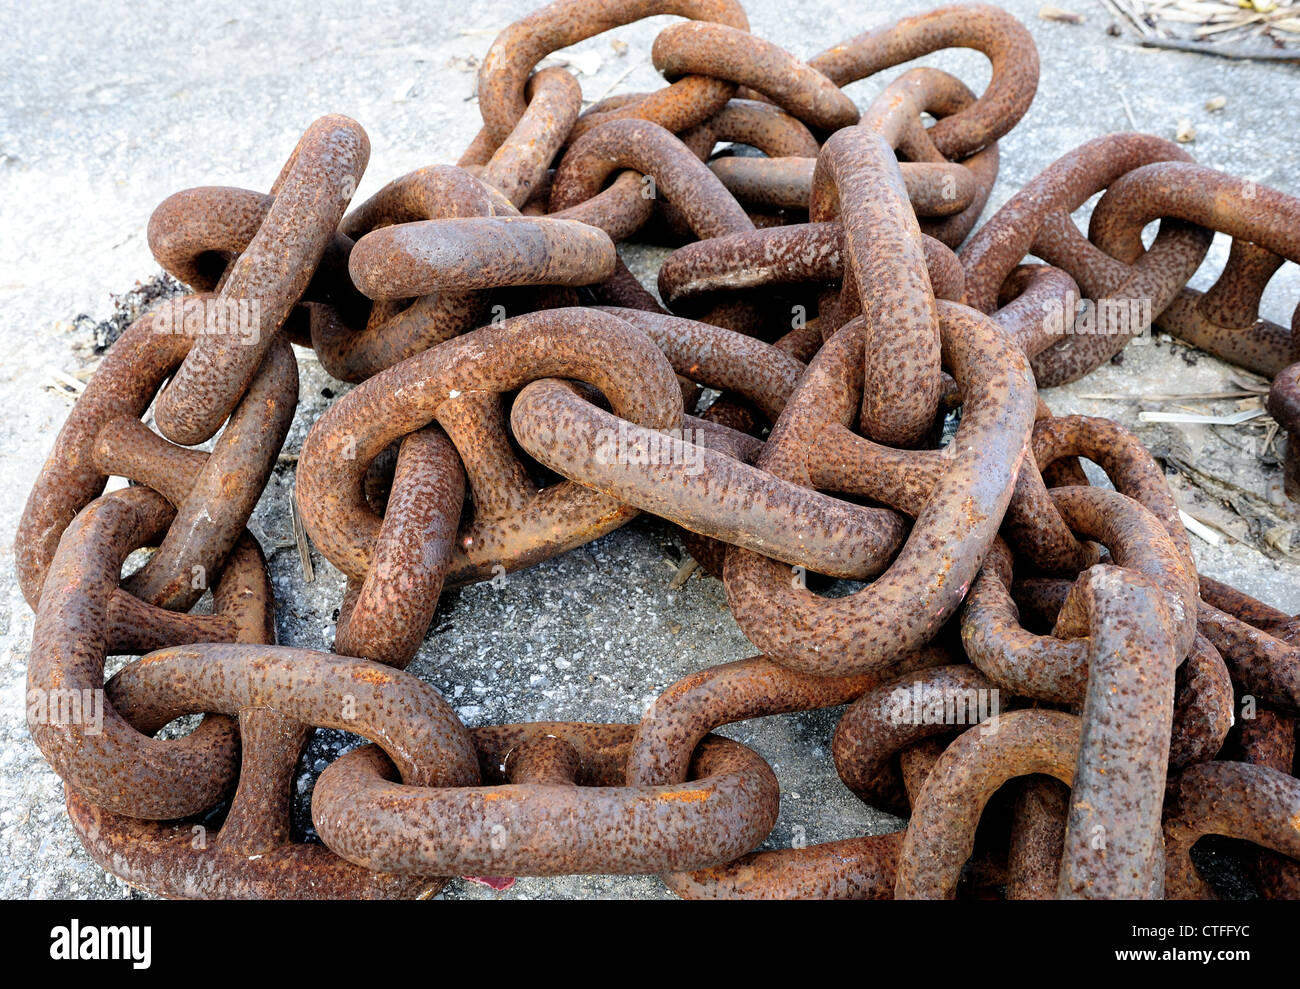 A pile of rusted chains at a typical fishing port in Okinawa, Japan Stock Photo